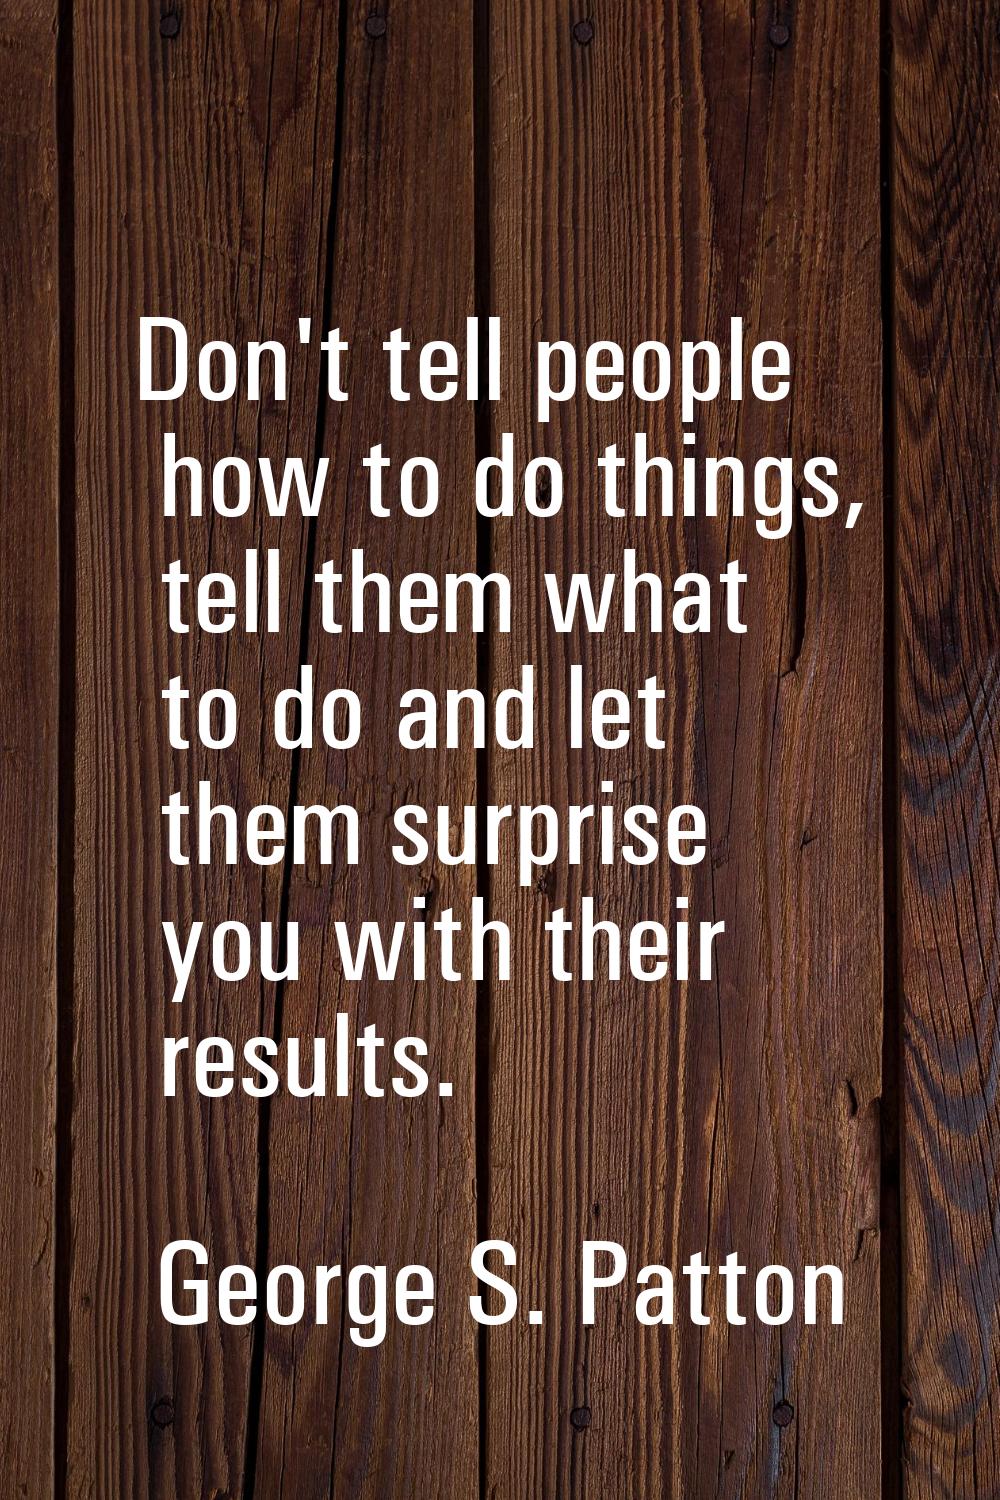 Don't tell people how to do things, tell them what to do and let them surprise you with their resul